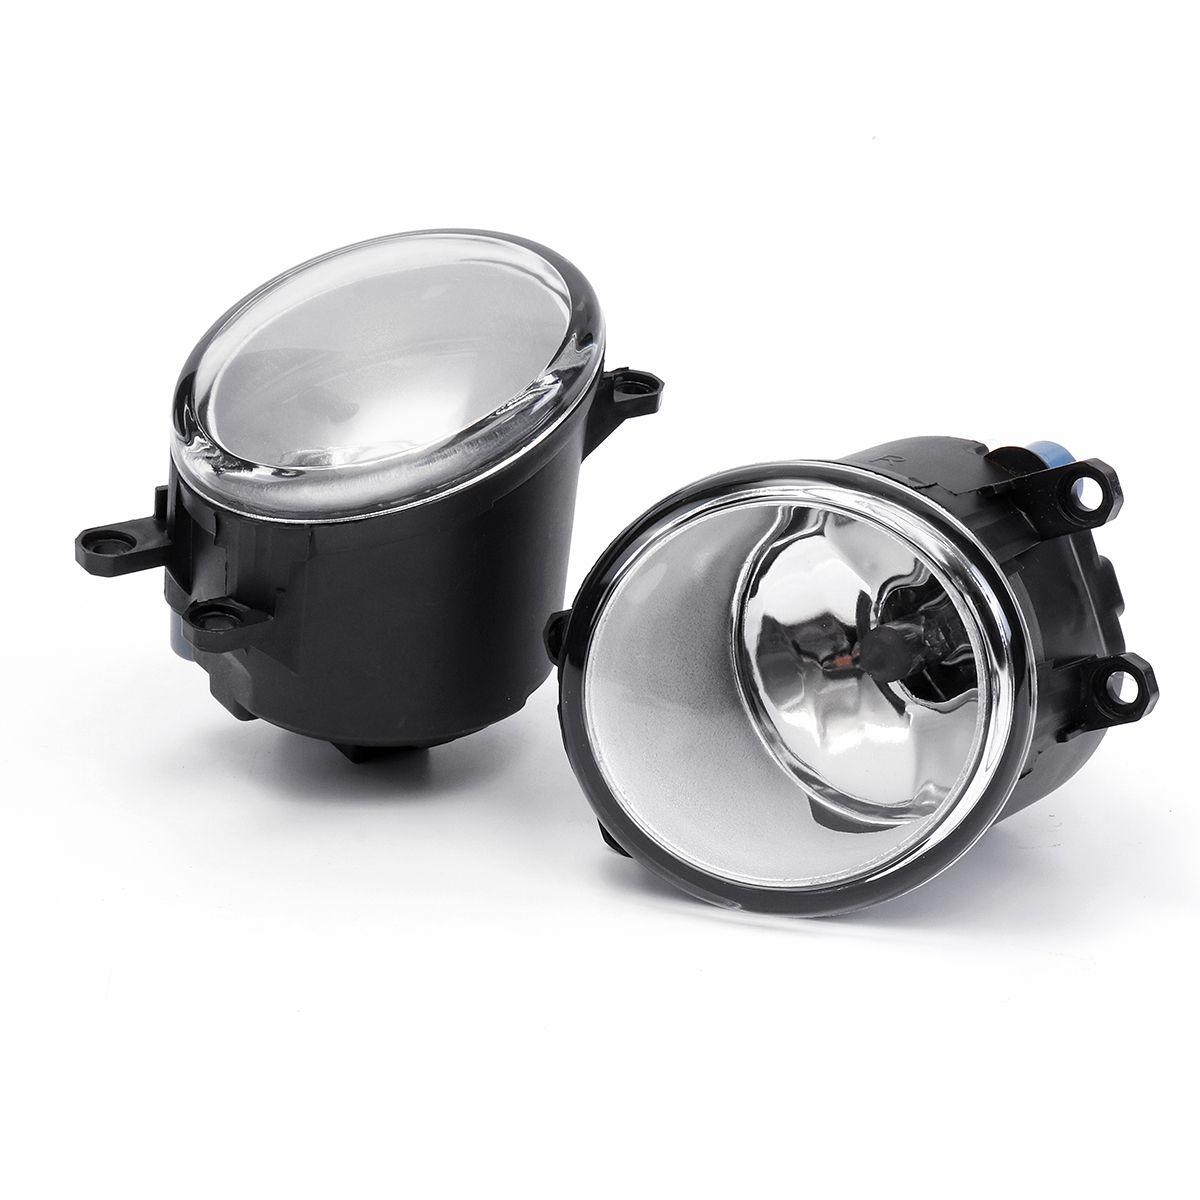 2Pcs-Car-Fog-Light-H11-Bulbs-Black-With-Wire-Harness-Covers-Kit-For-Toyota-Tacoma-2012-2015-1680515